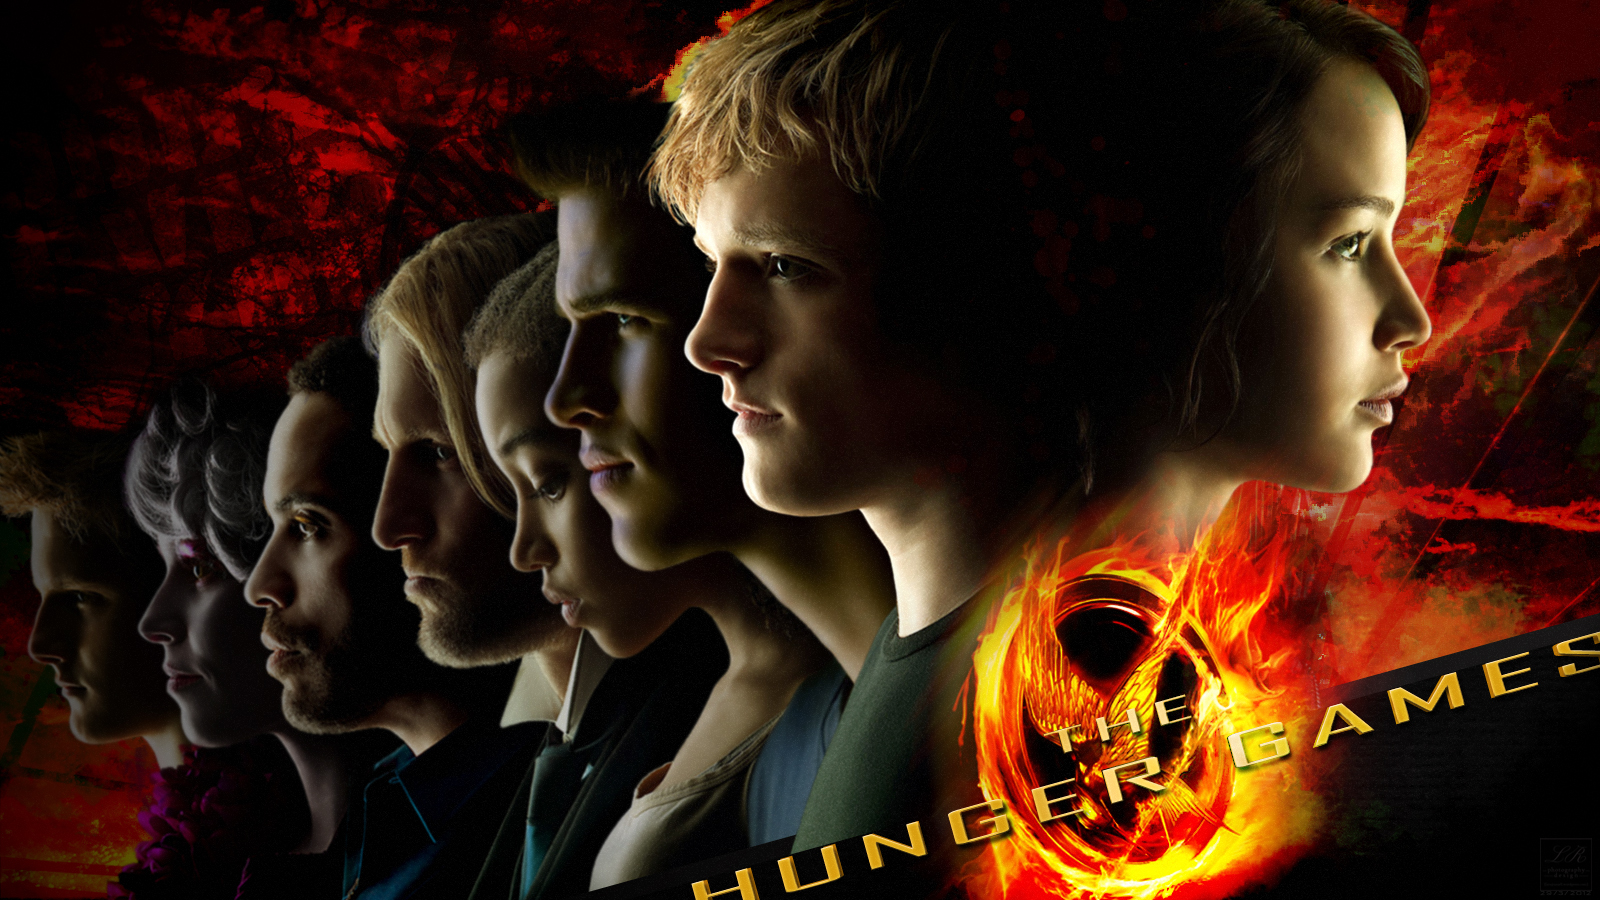 The Hunger Games images The Hunger Games wallpaper photos 30366729